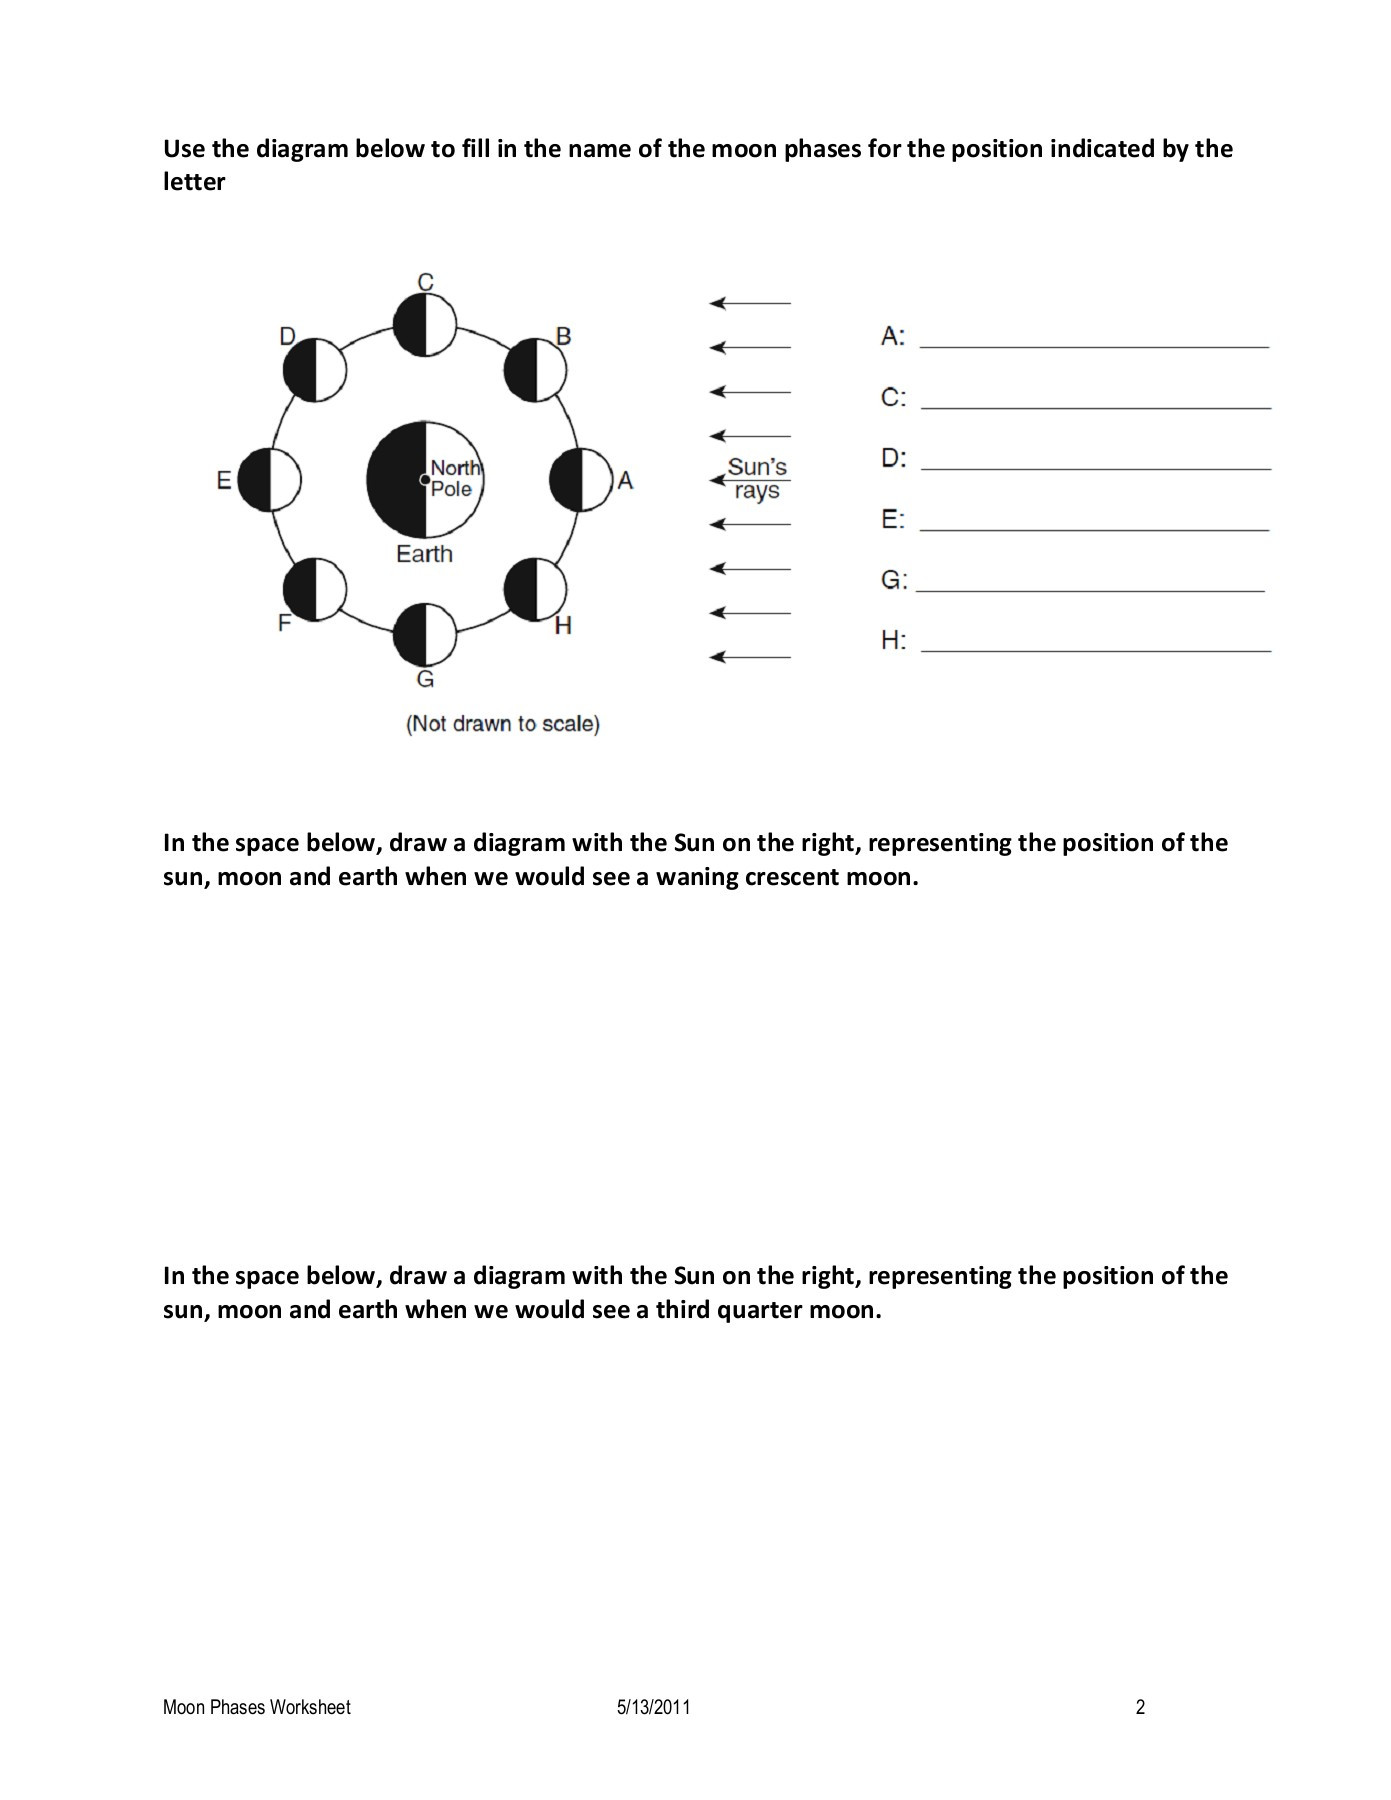 Moon Phases Worksheet Pdf Moon Phases Worksheet Pages 1 4 Text Version